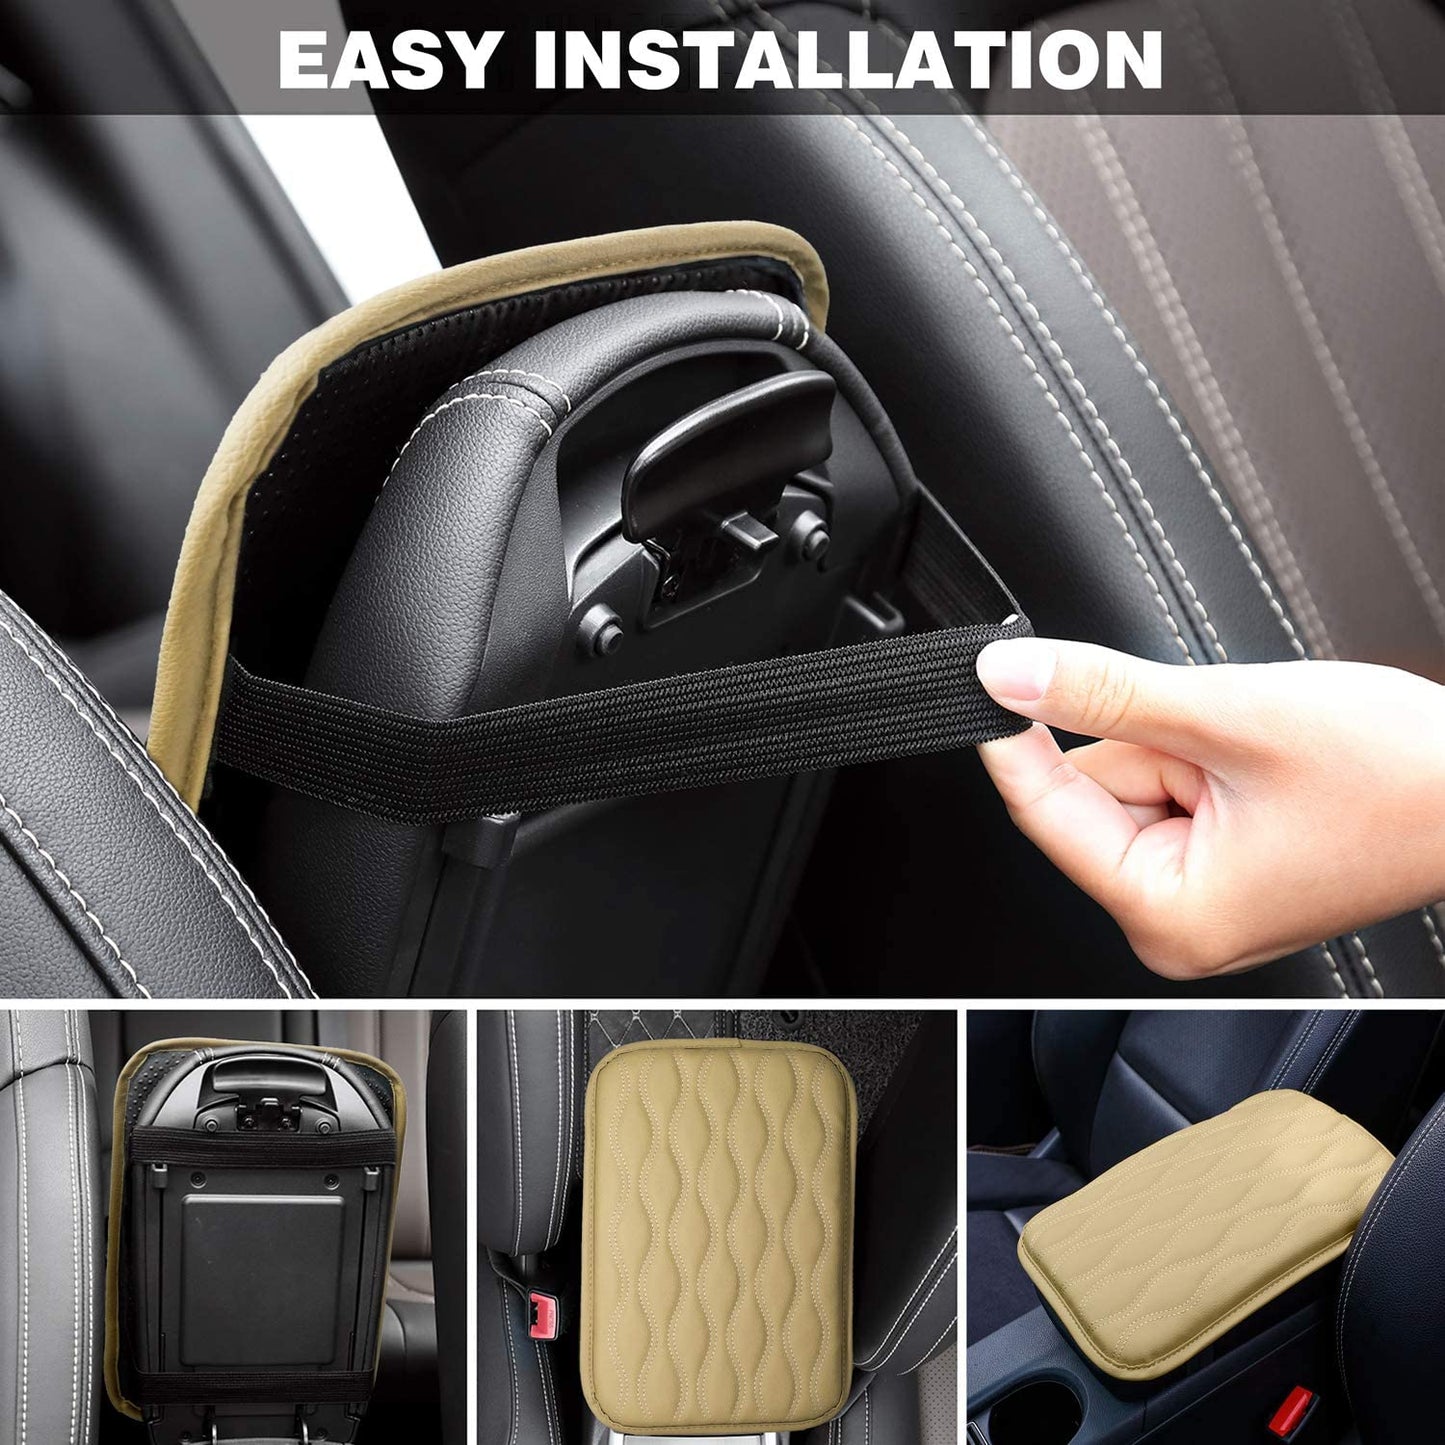 Universal Center Console Cover for Most Vehicle, SUV, Truck, Car, Waterproof Armrest Cover Center Console Pad, Car Armrest Seat Box Cover Protector (Beige)